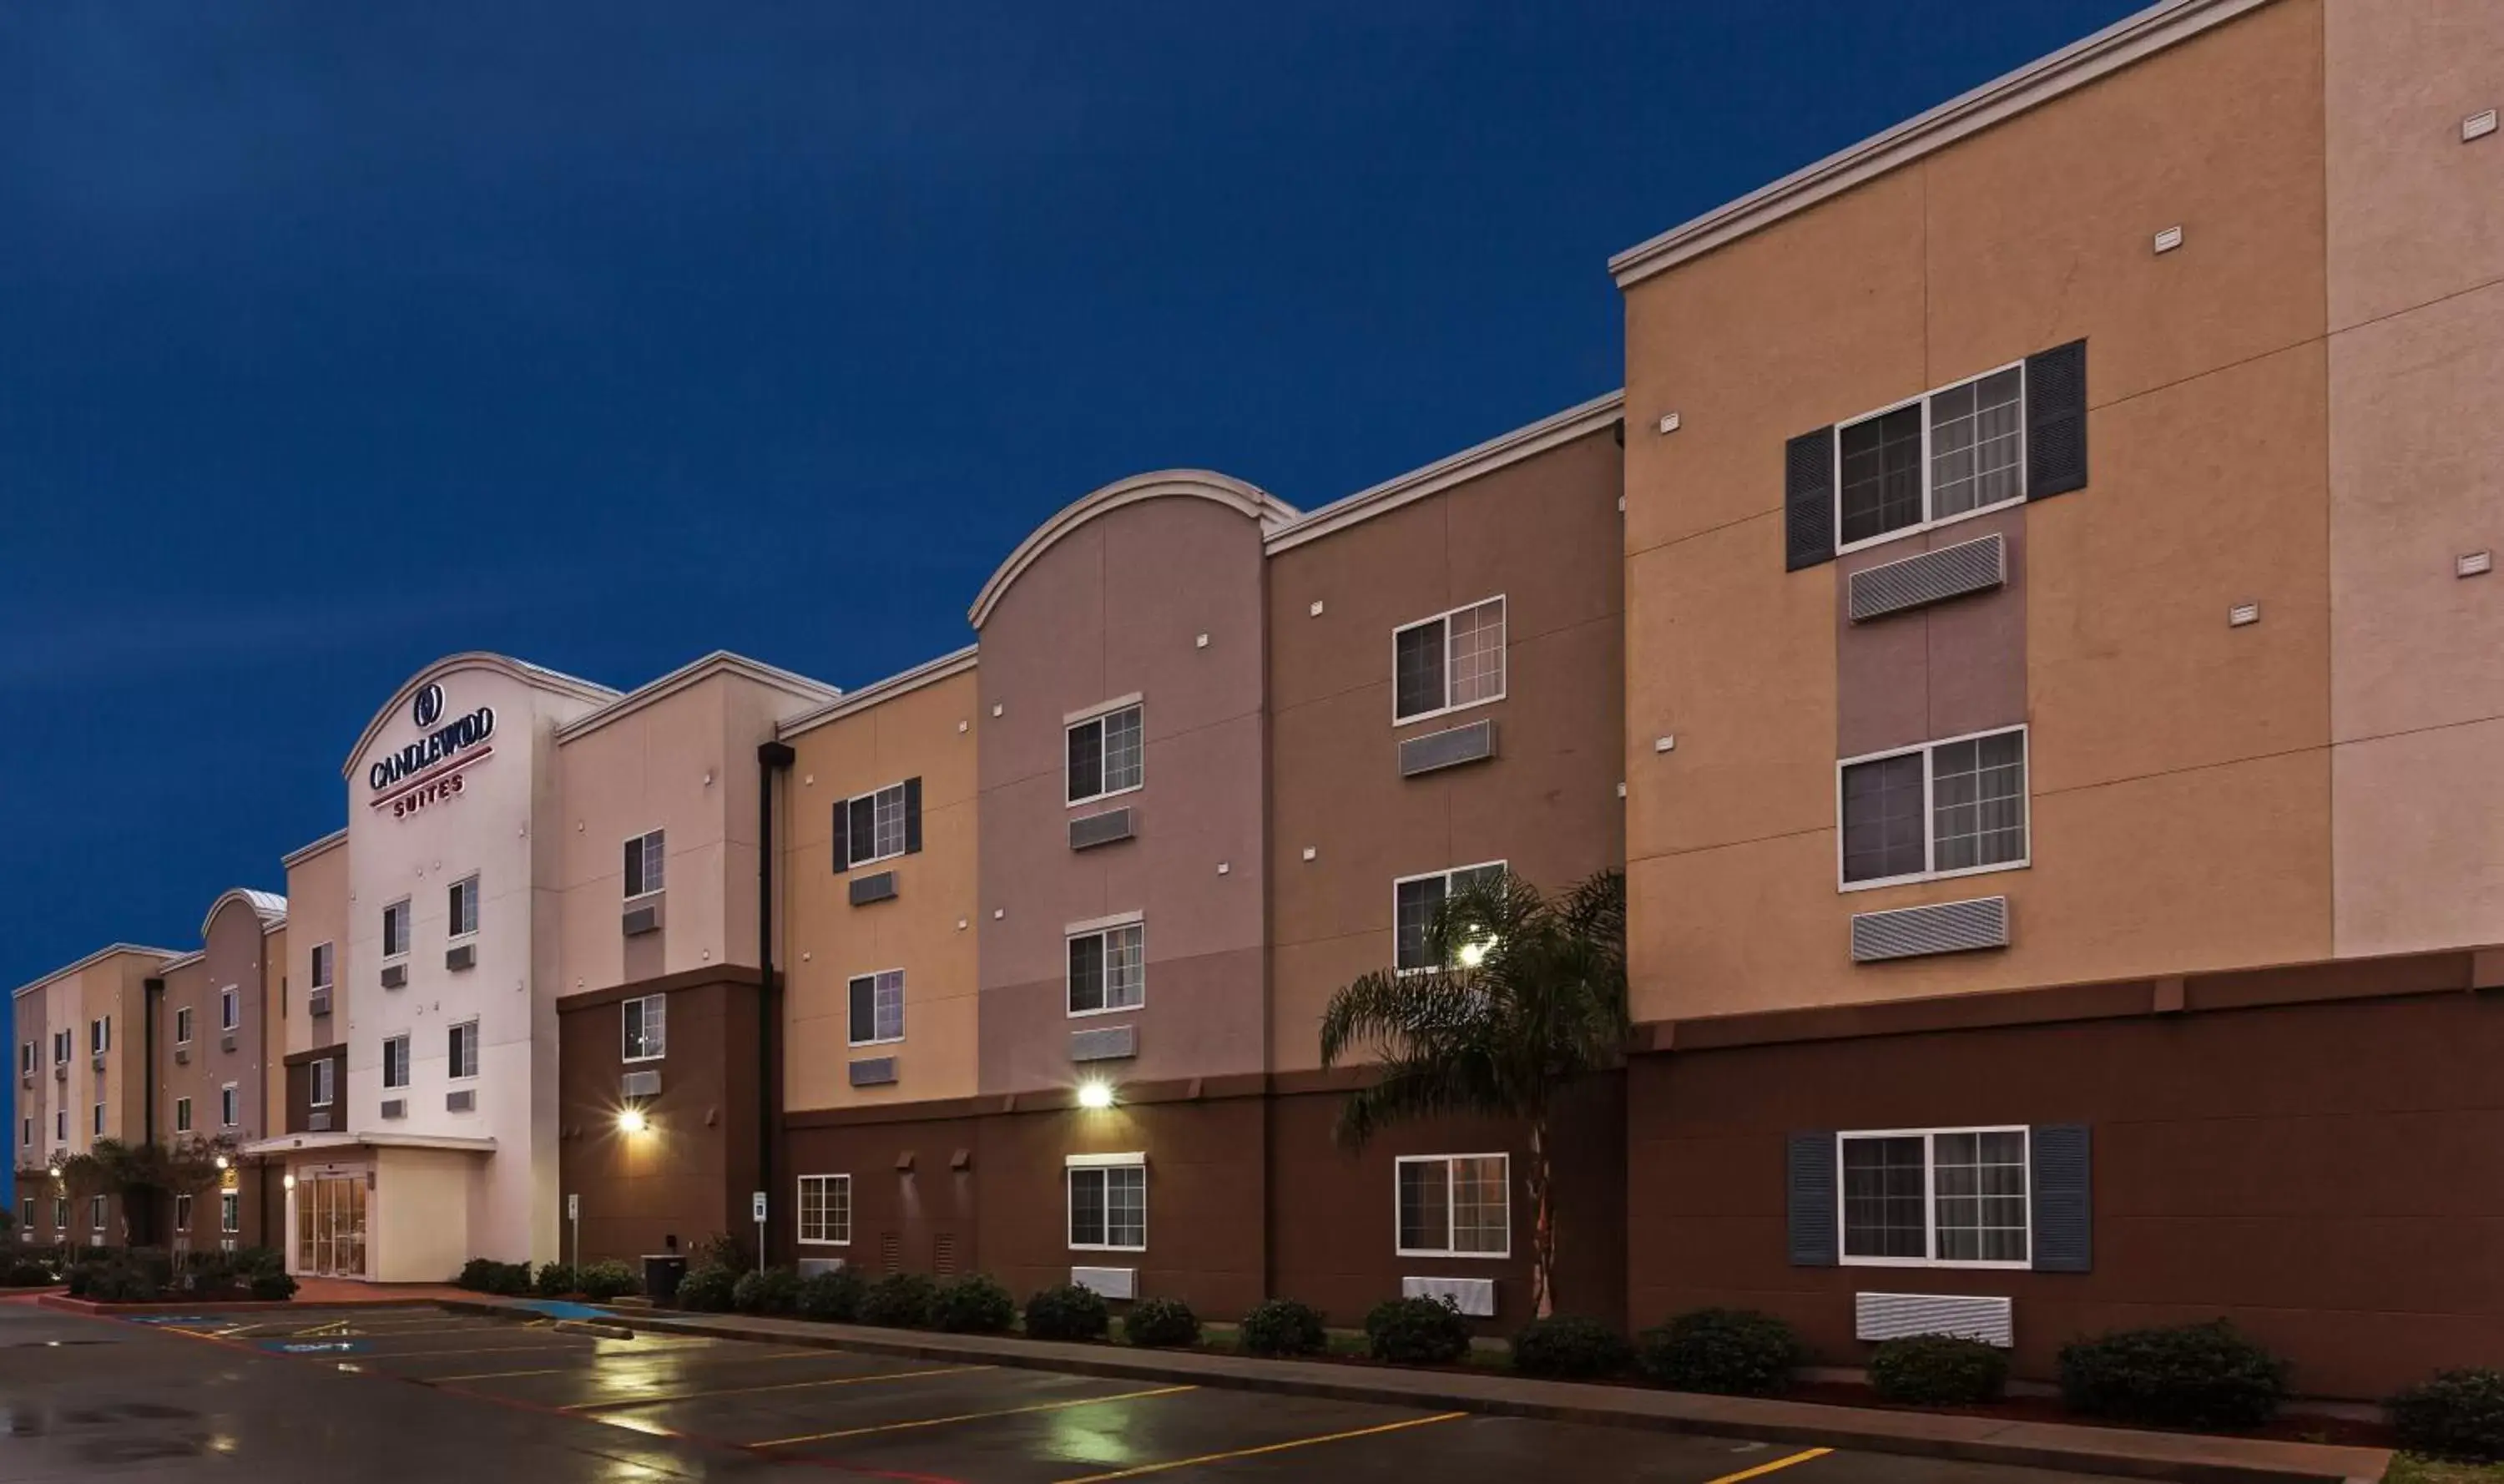 Property Building in Candlewood Suites - Texas City, an IHG Hotel